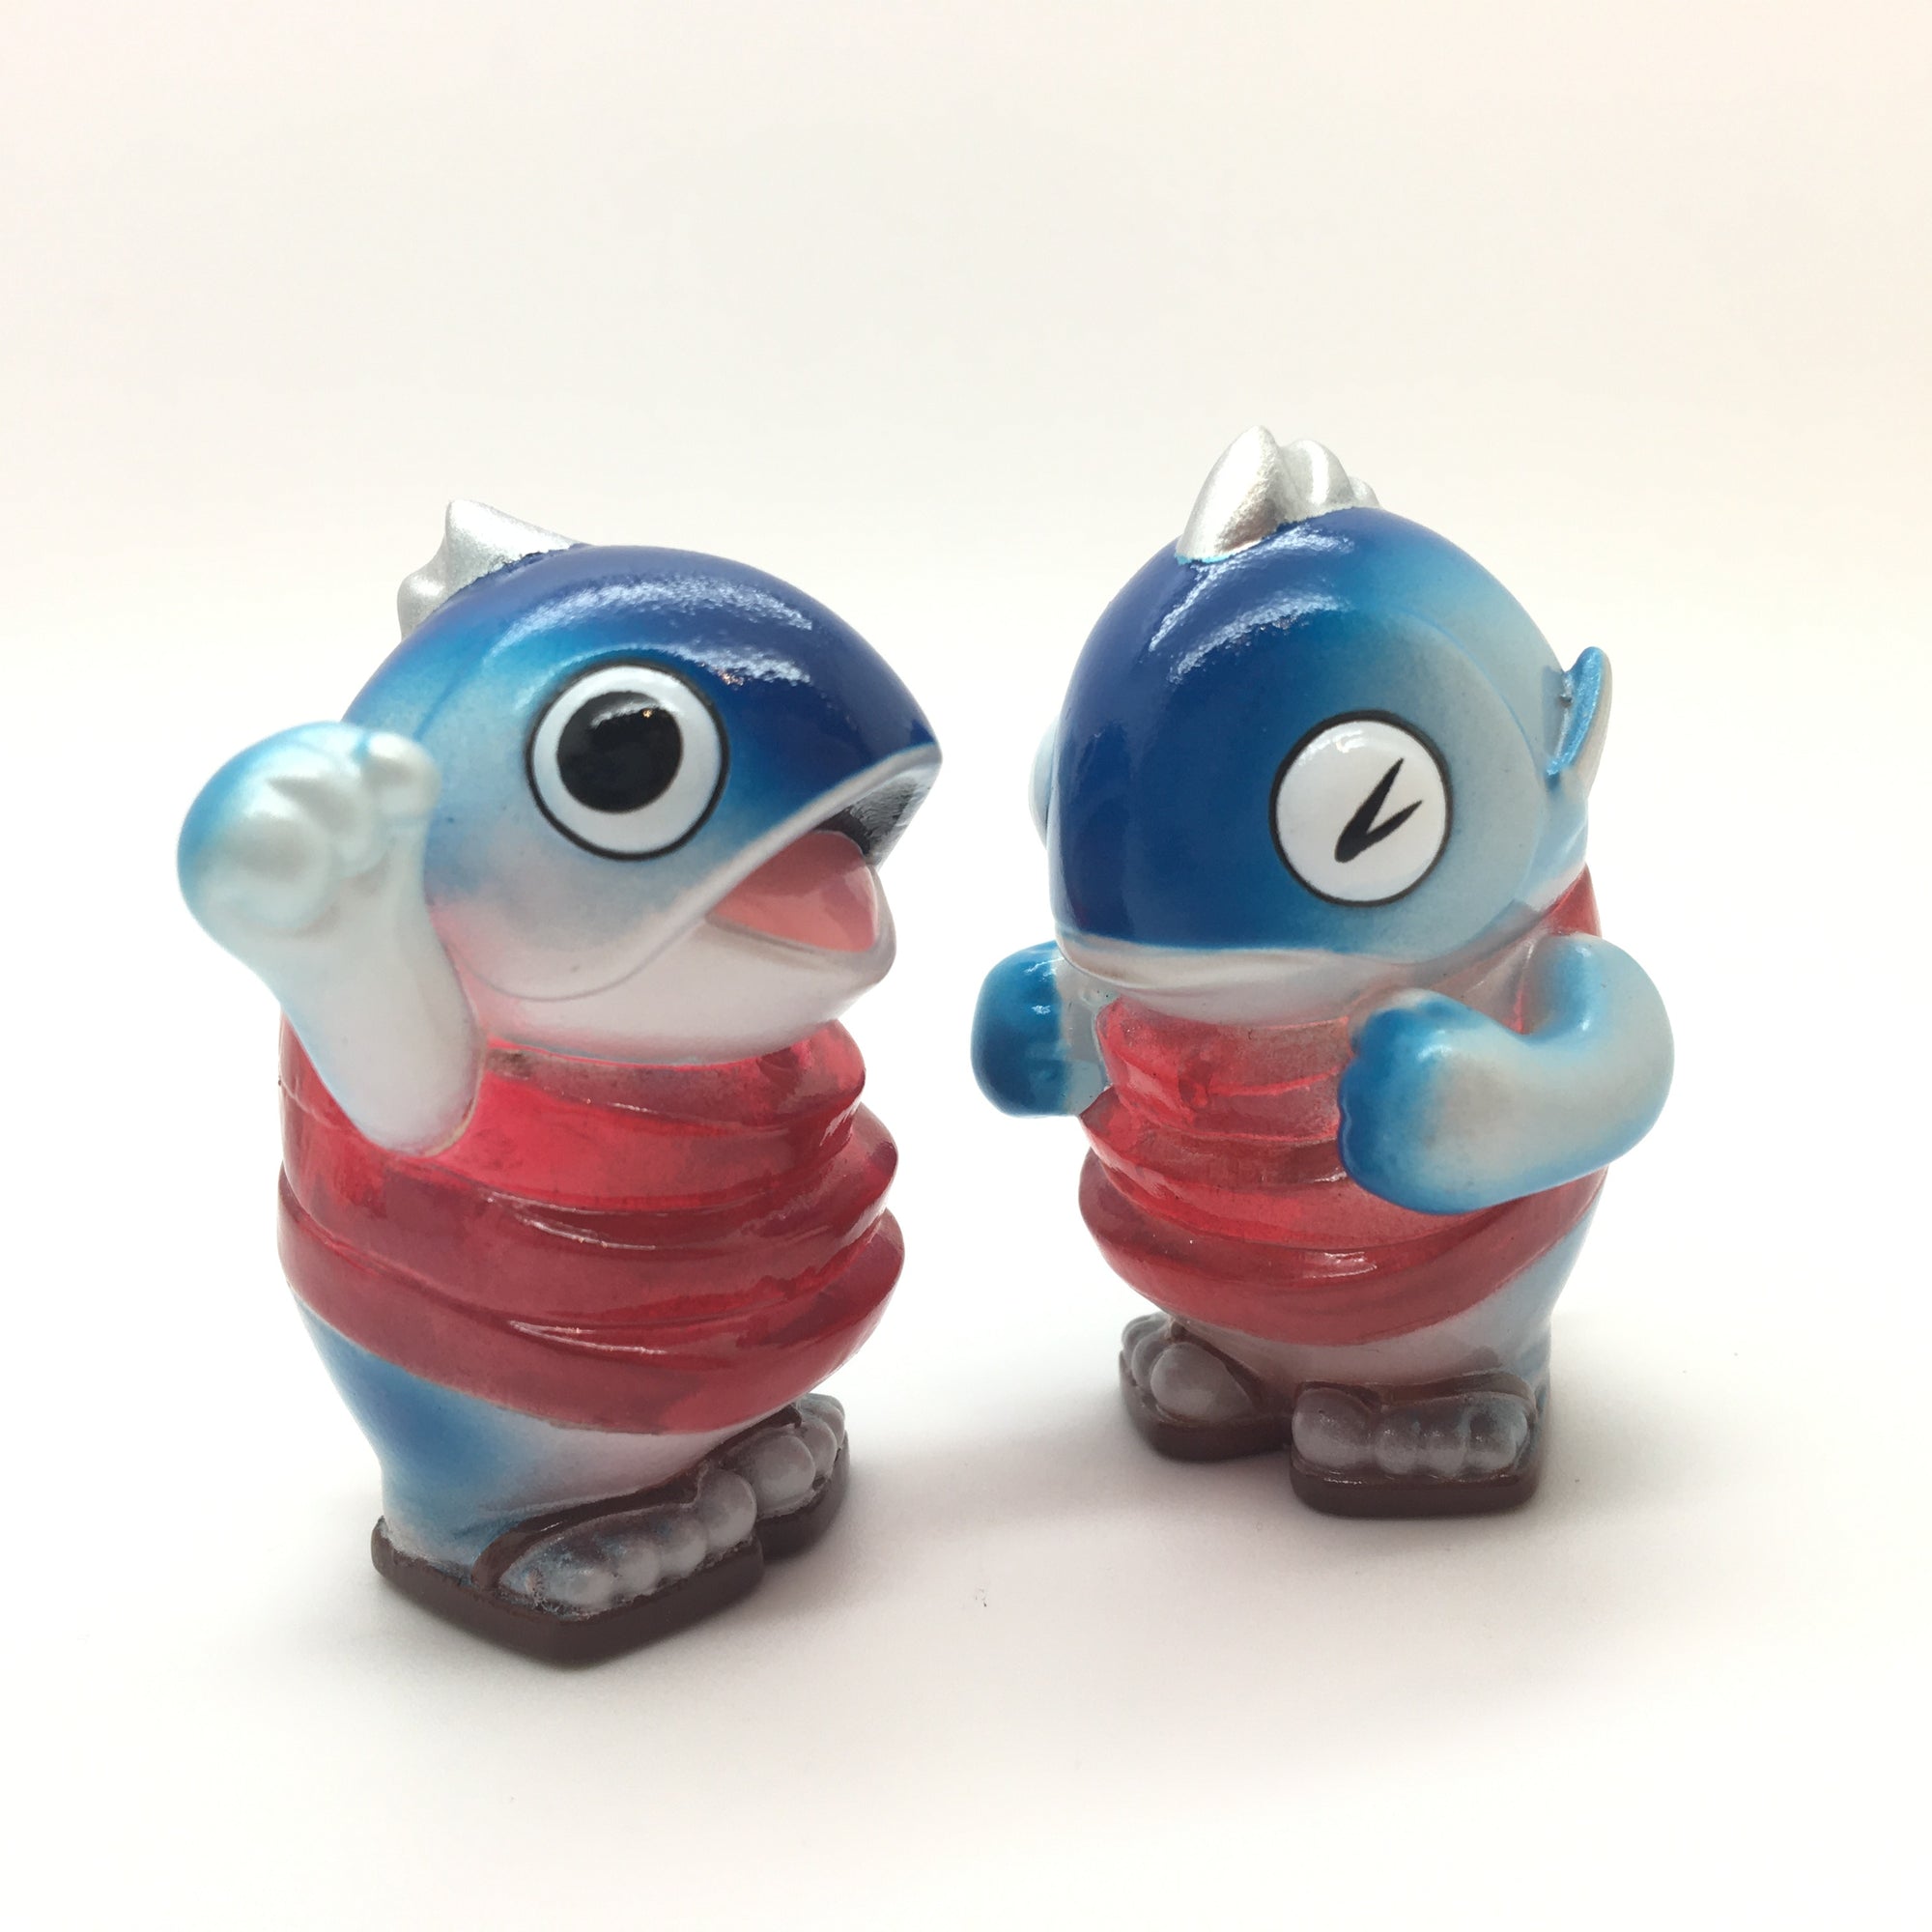 Mame Moyashi Finger Puppet Toy Series 1 by Chino Lam